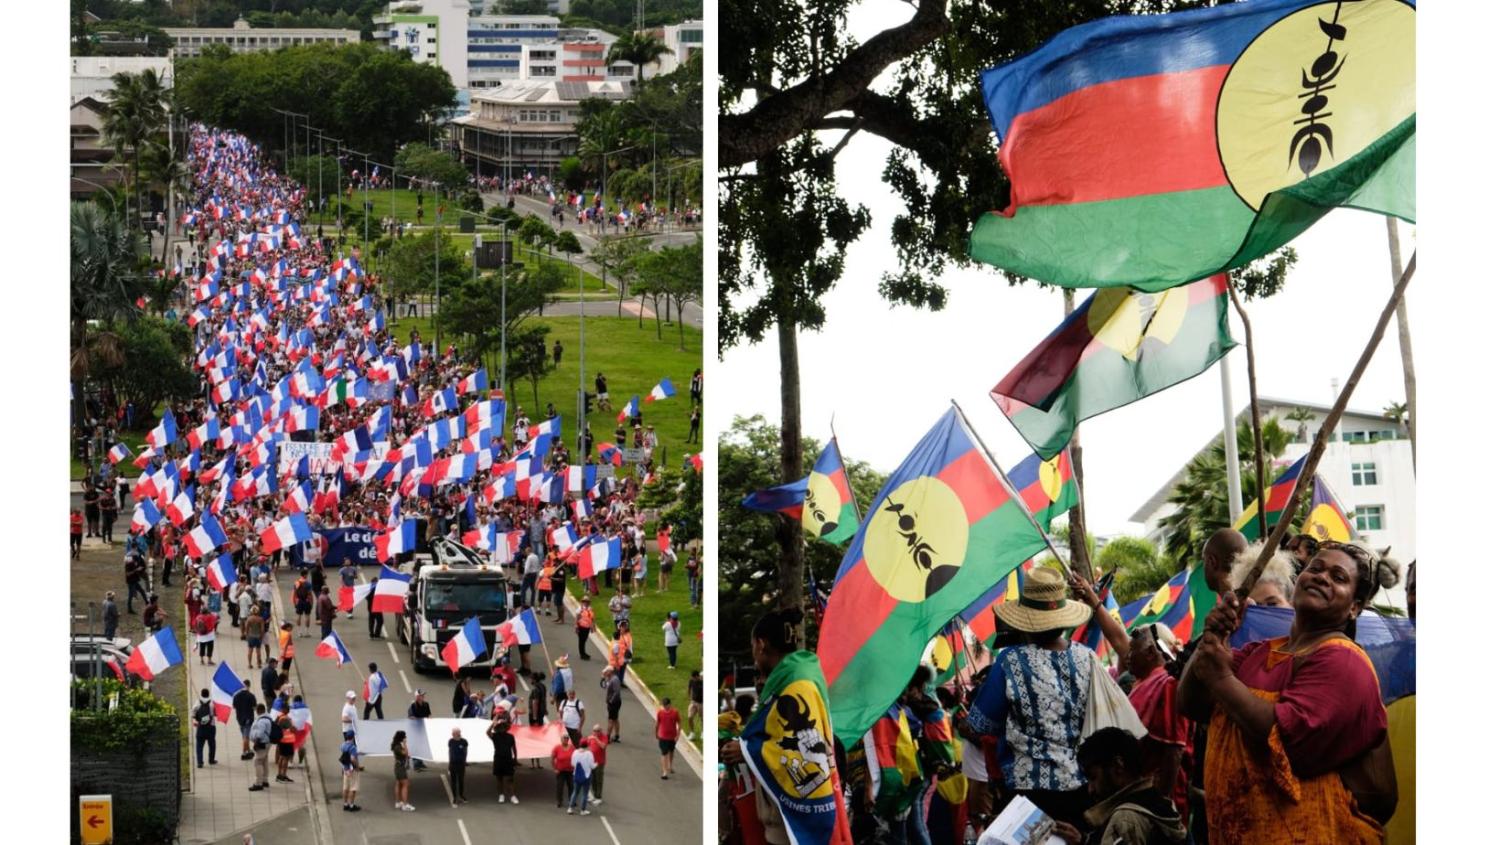 Weekend rallies by supporters of loyalist parties and independence activists alike demonstrate in Noumea ahead the forthcoming provincial elections in New Caledonia (Photos: Theo Rouby/AFP via Getty Images)